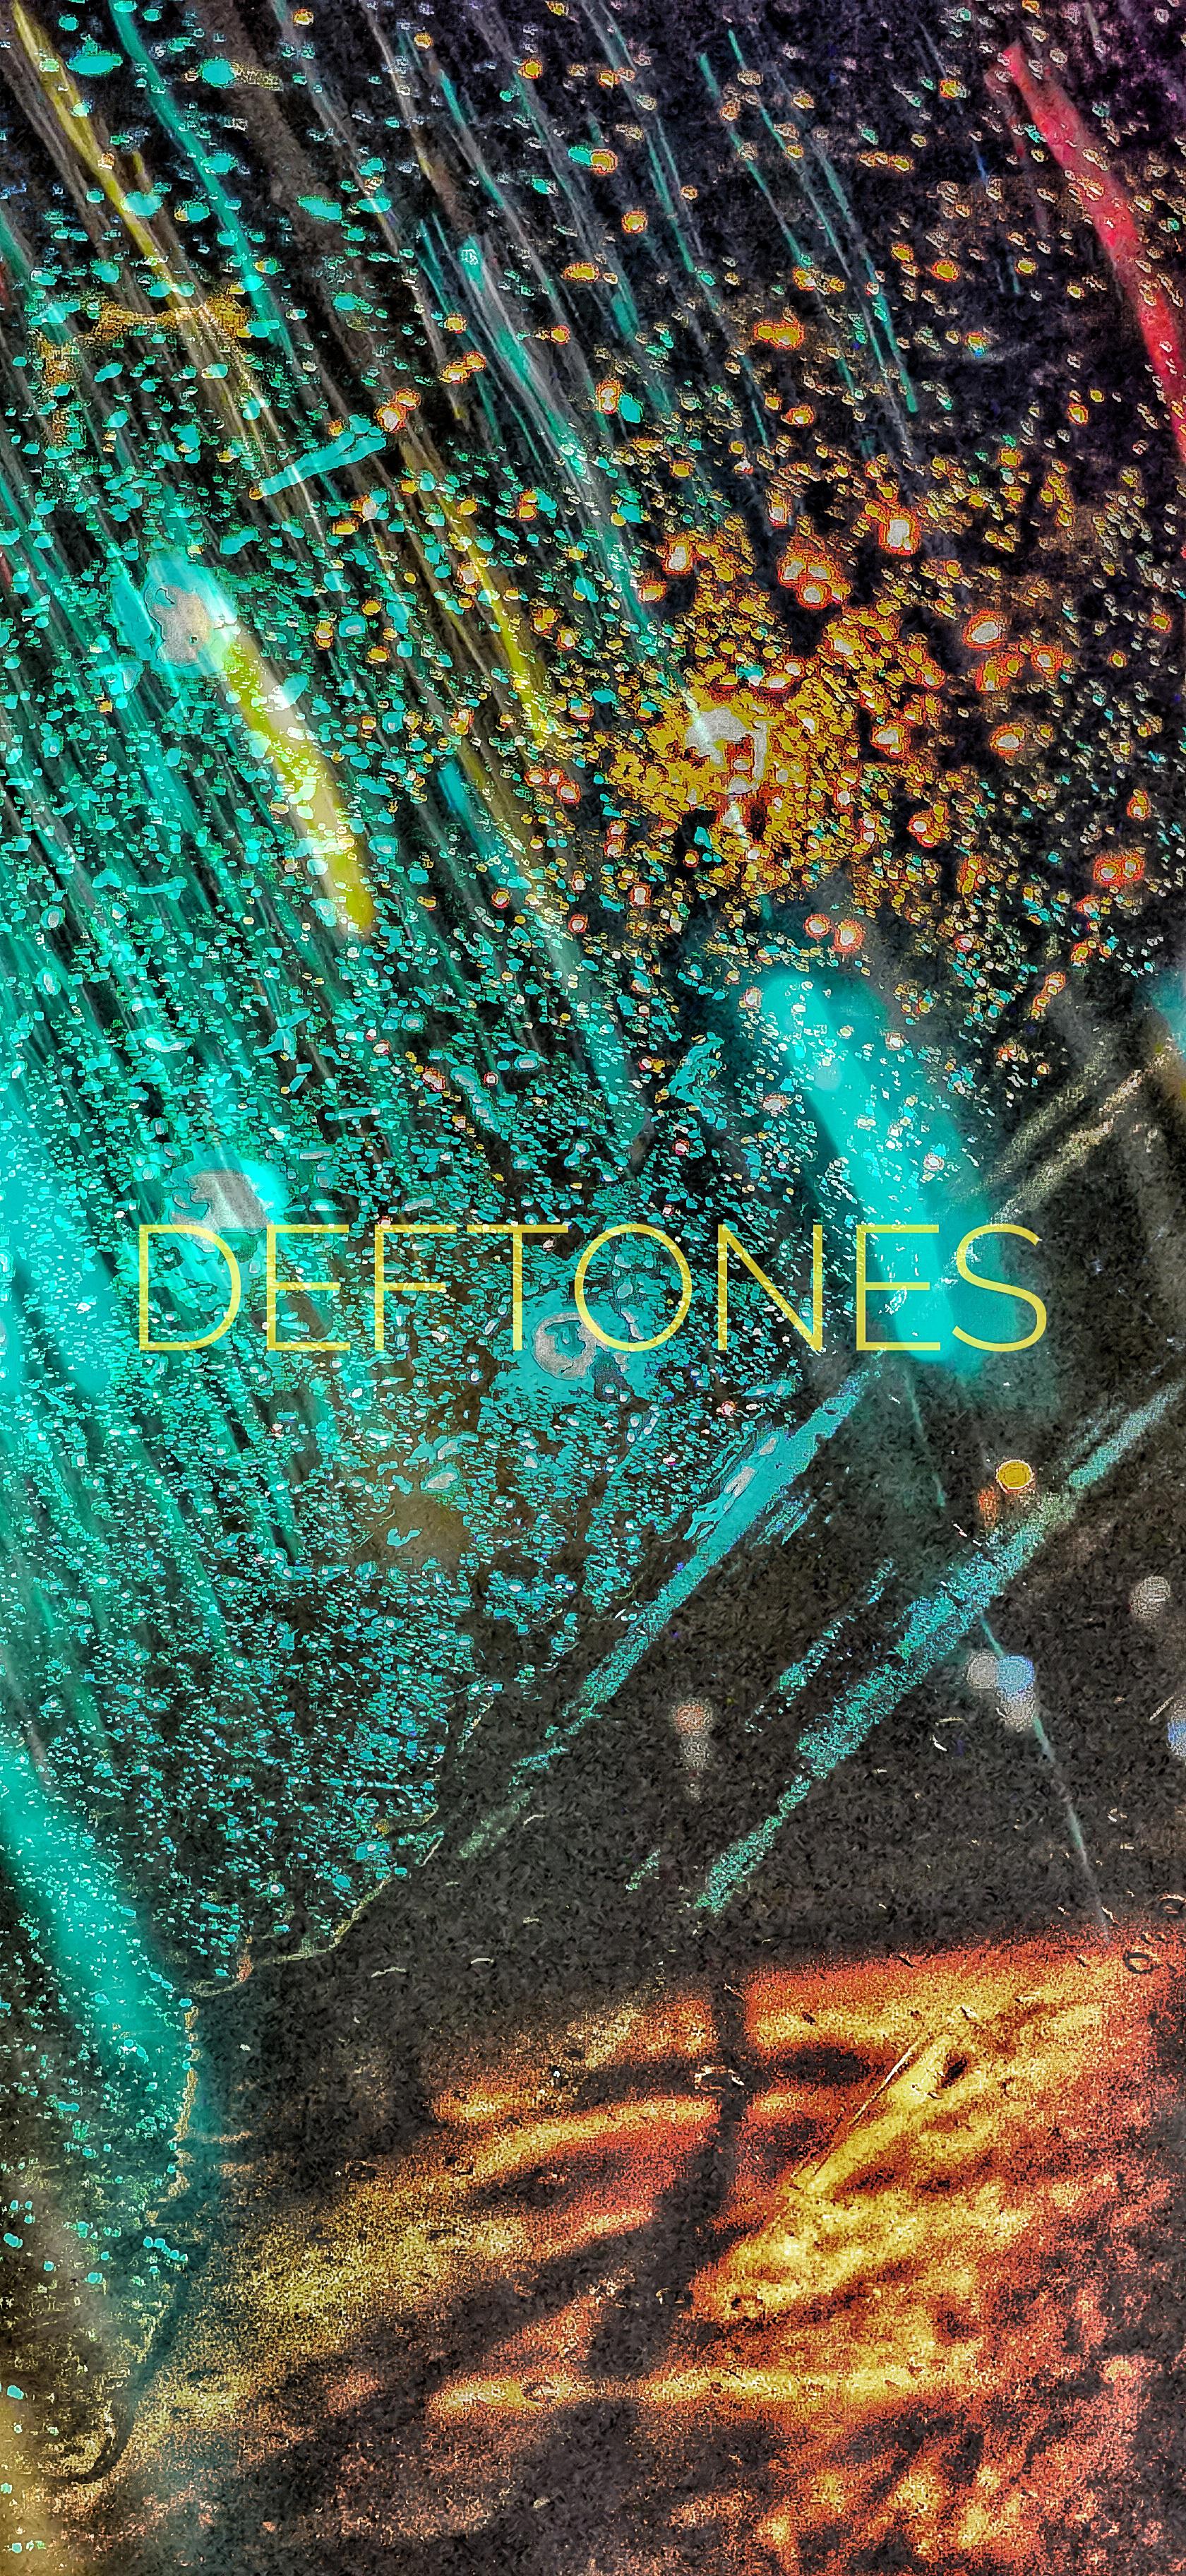 Just a little wallpaper i made what you guys think rdeftones